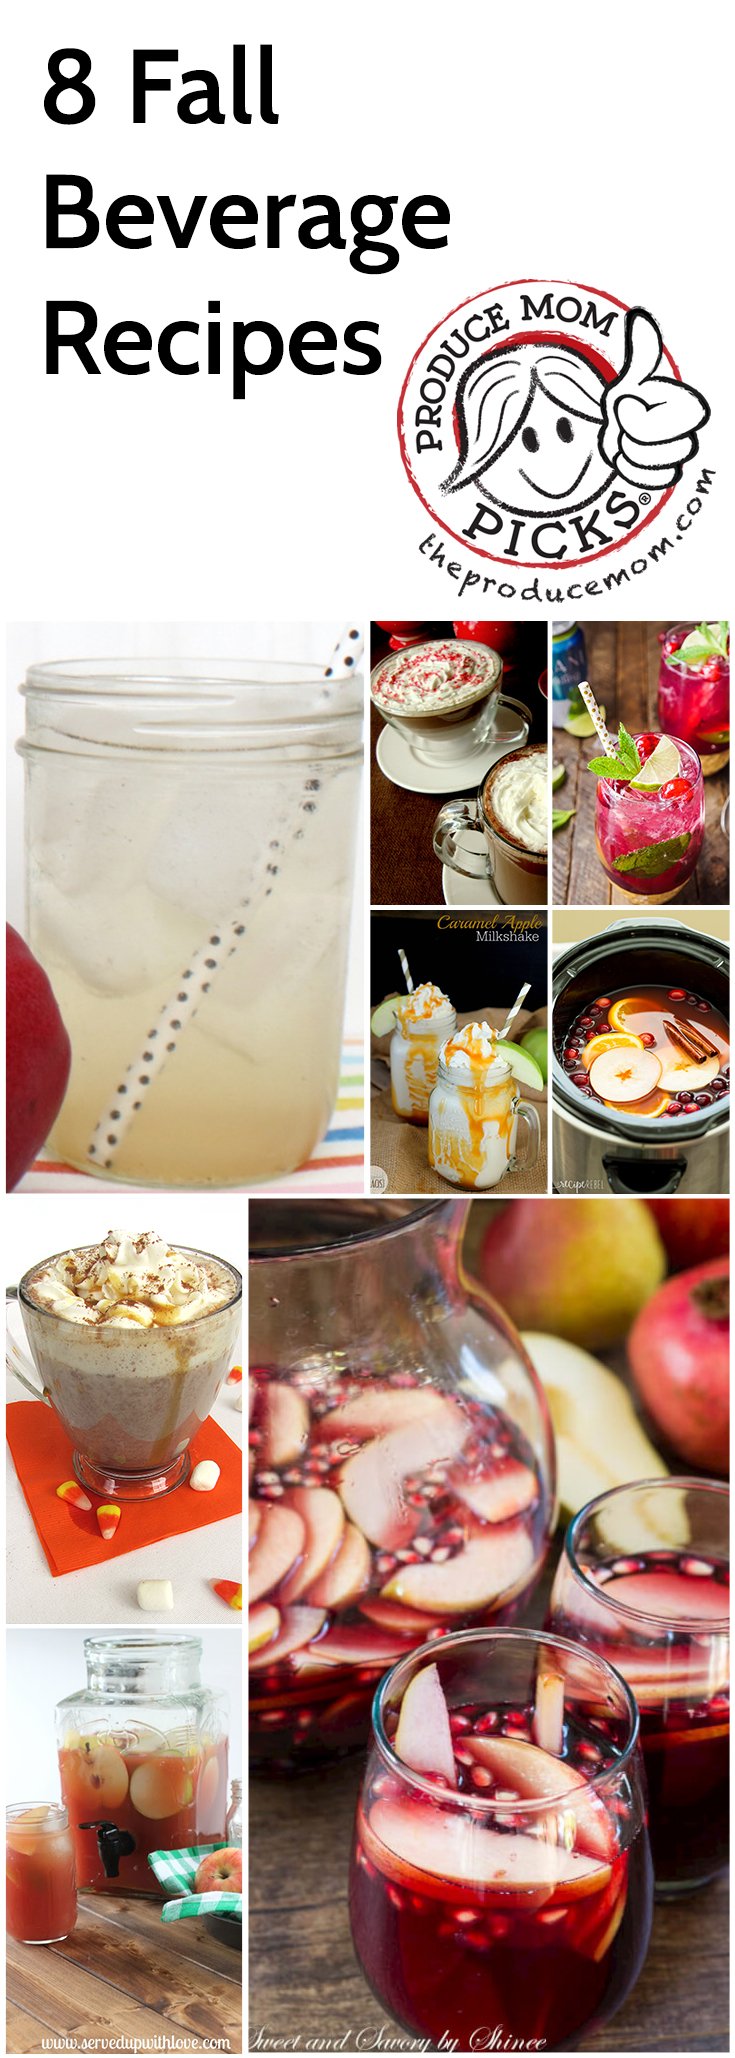 8 Fall Beverage Recipes from The Produce Mom